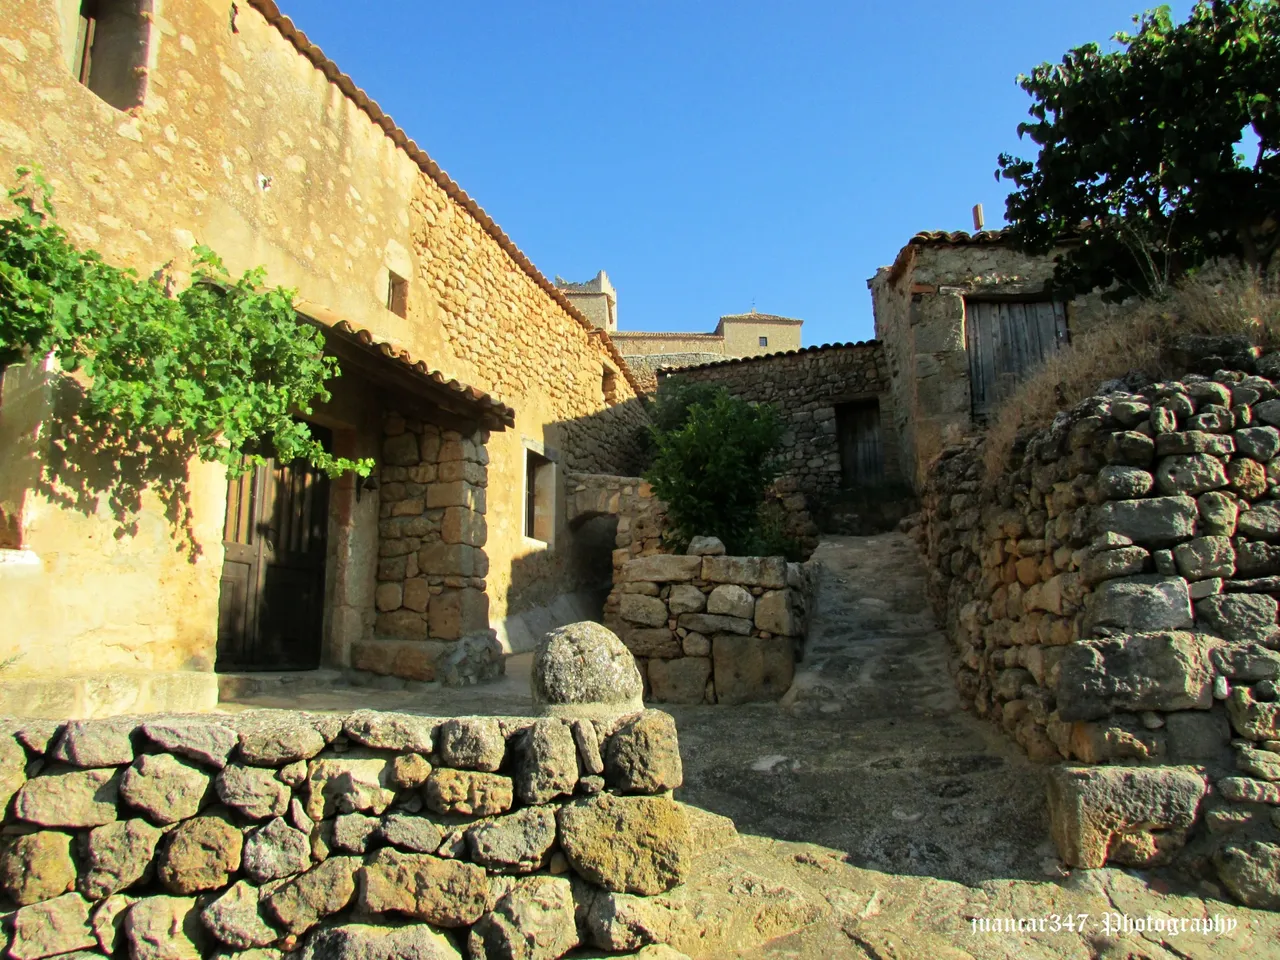 Beautiful stone and adobe houses